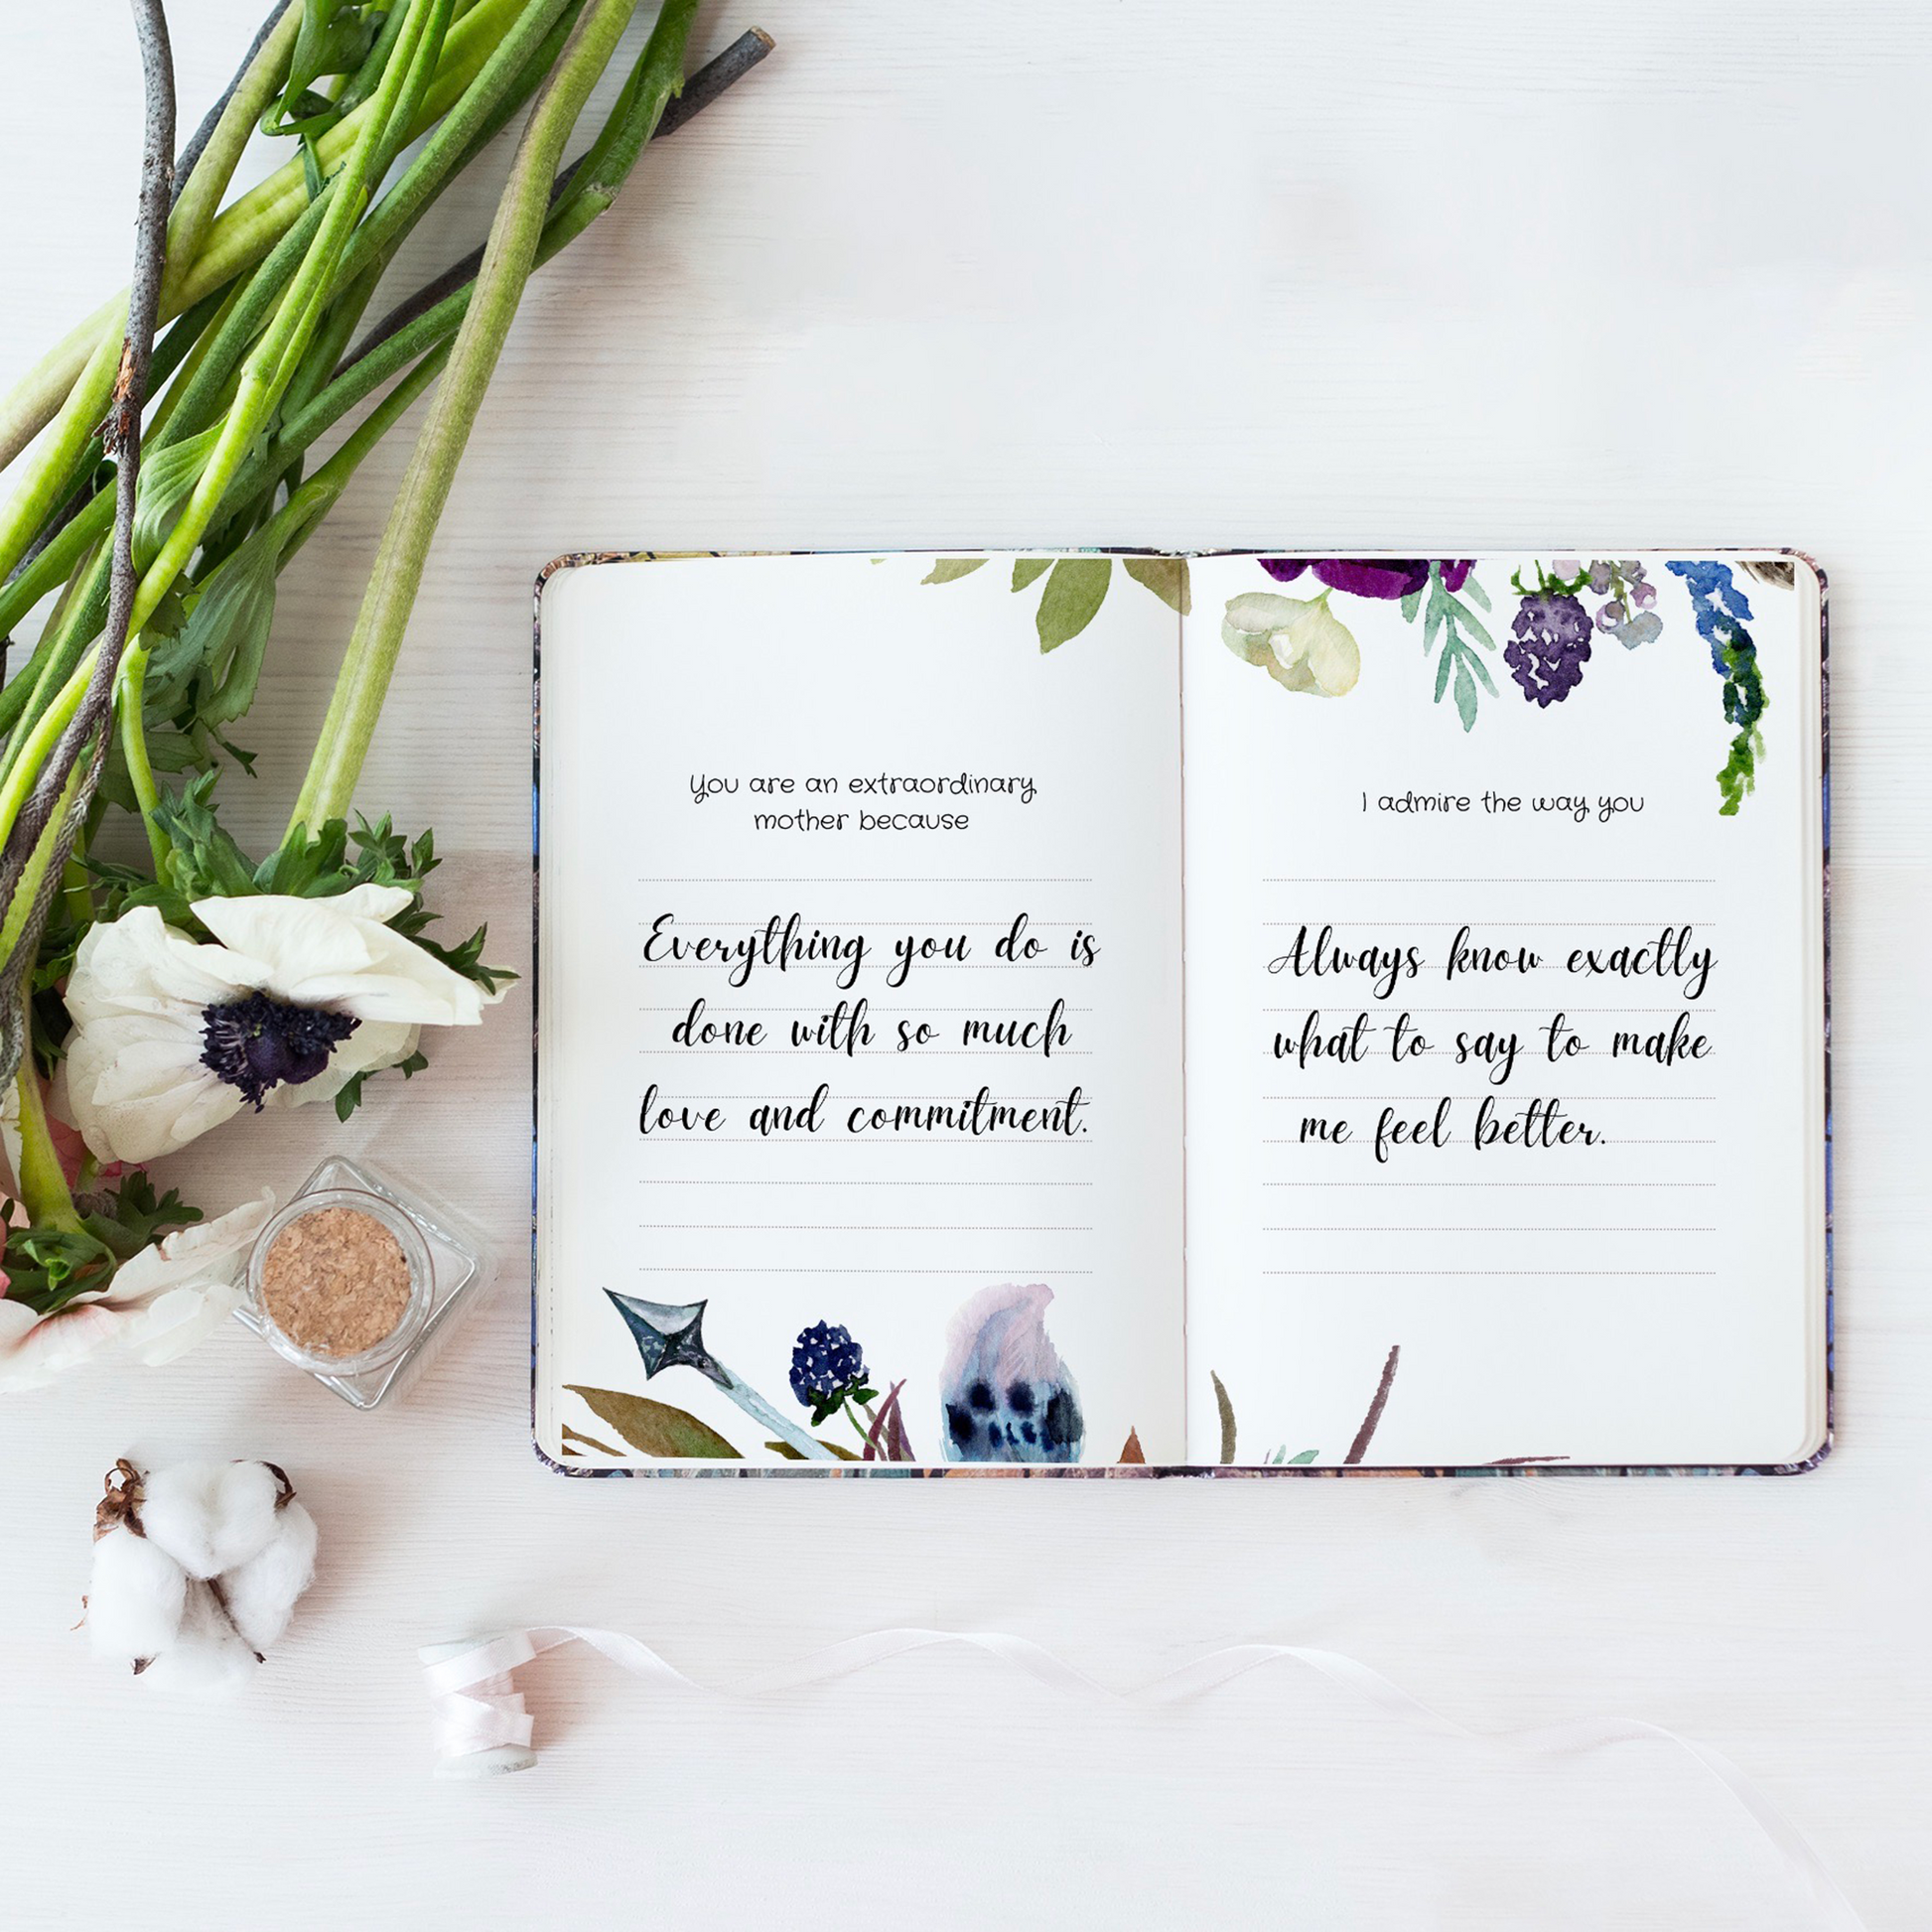 Personalized Gift For Mom, Custom Book For Mom, Sentimental Gifts For Mom  -Luhvee Books - Luhvee Books